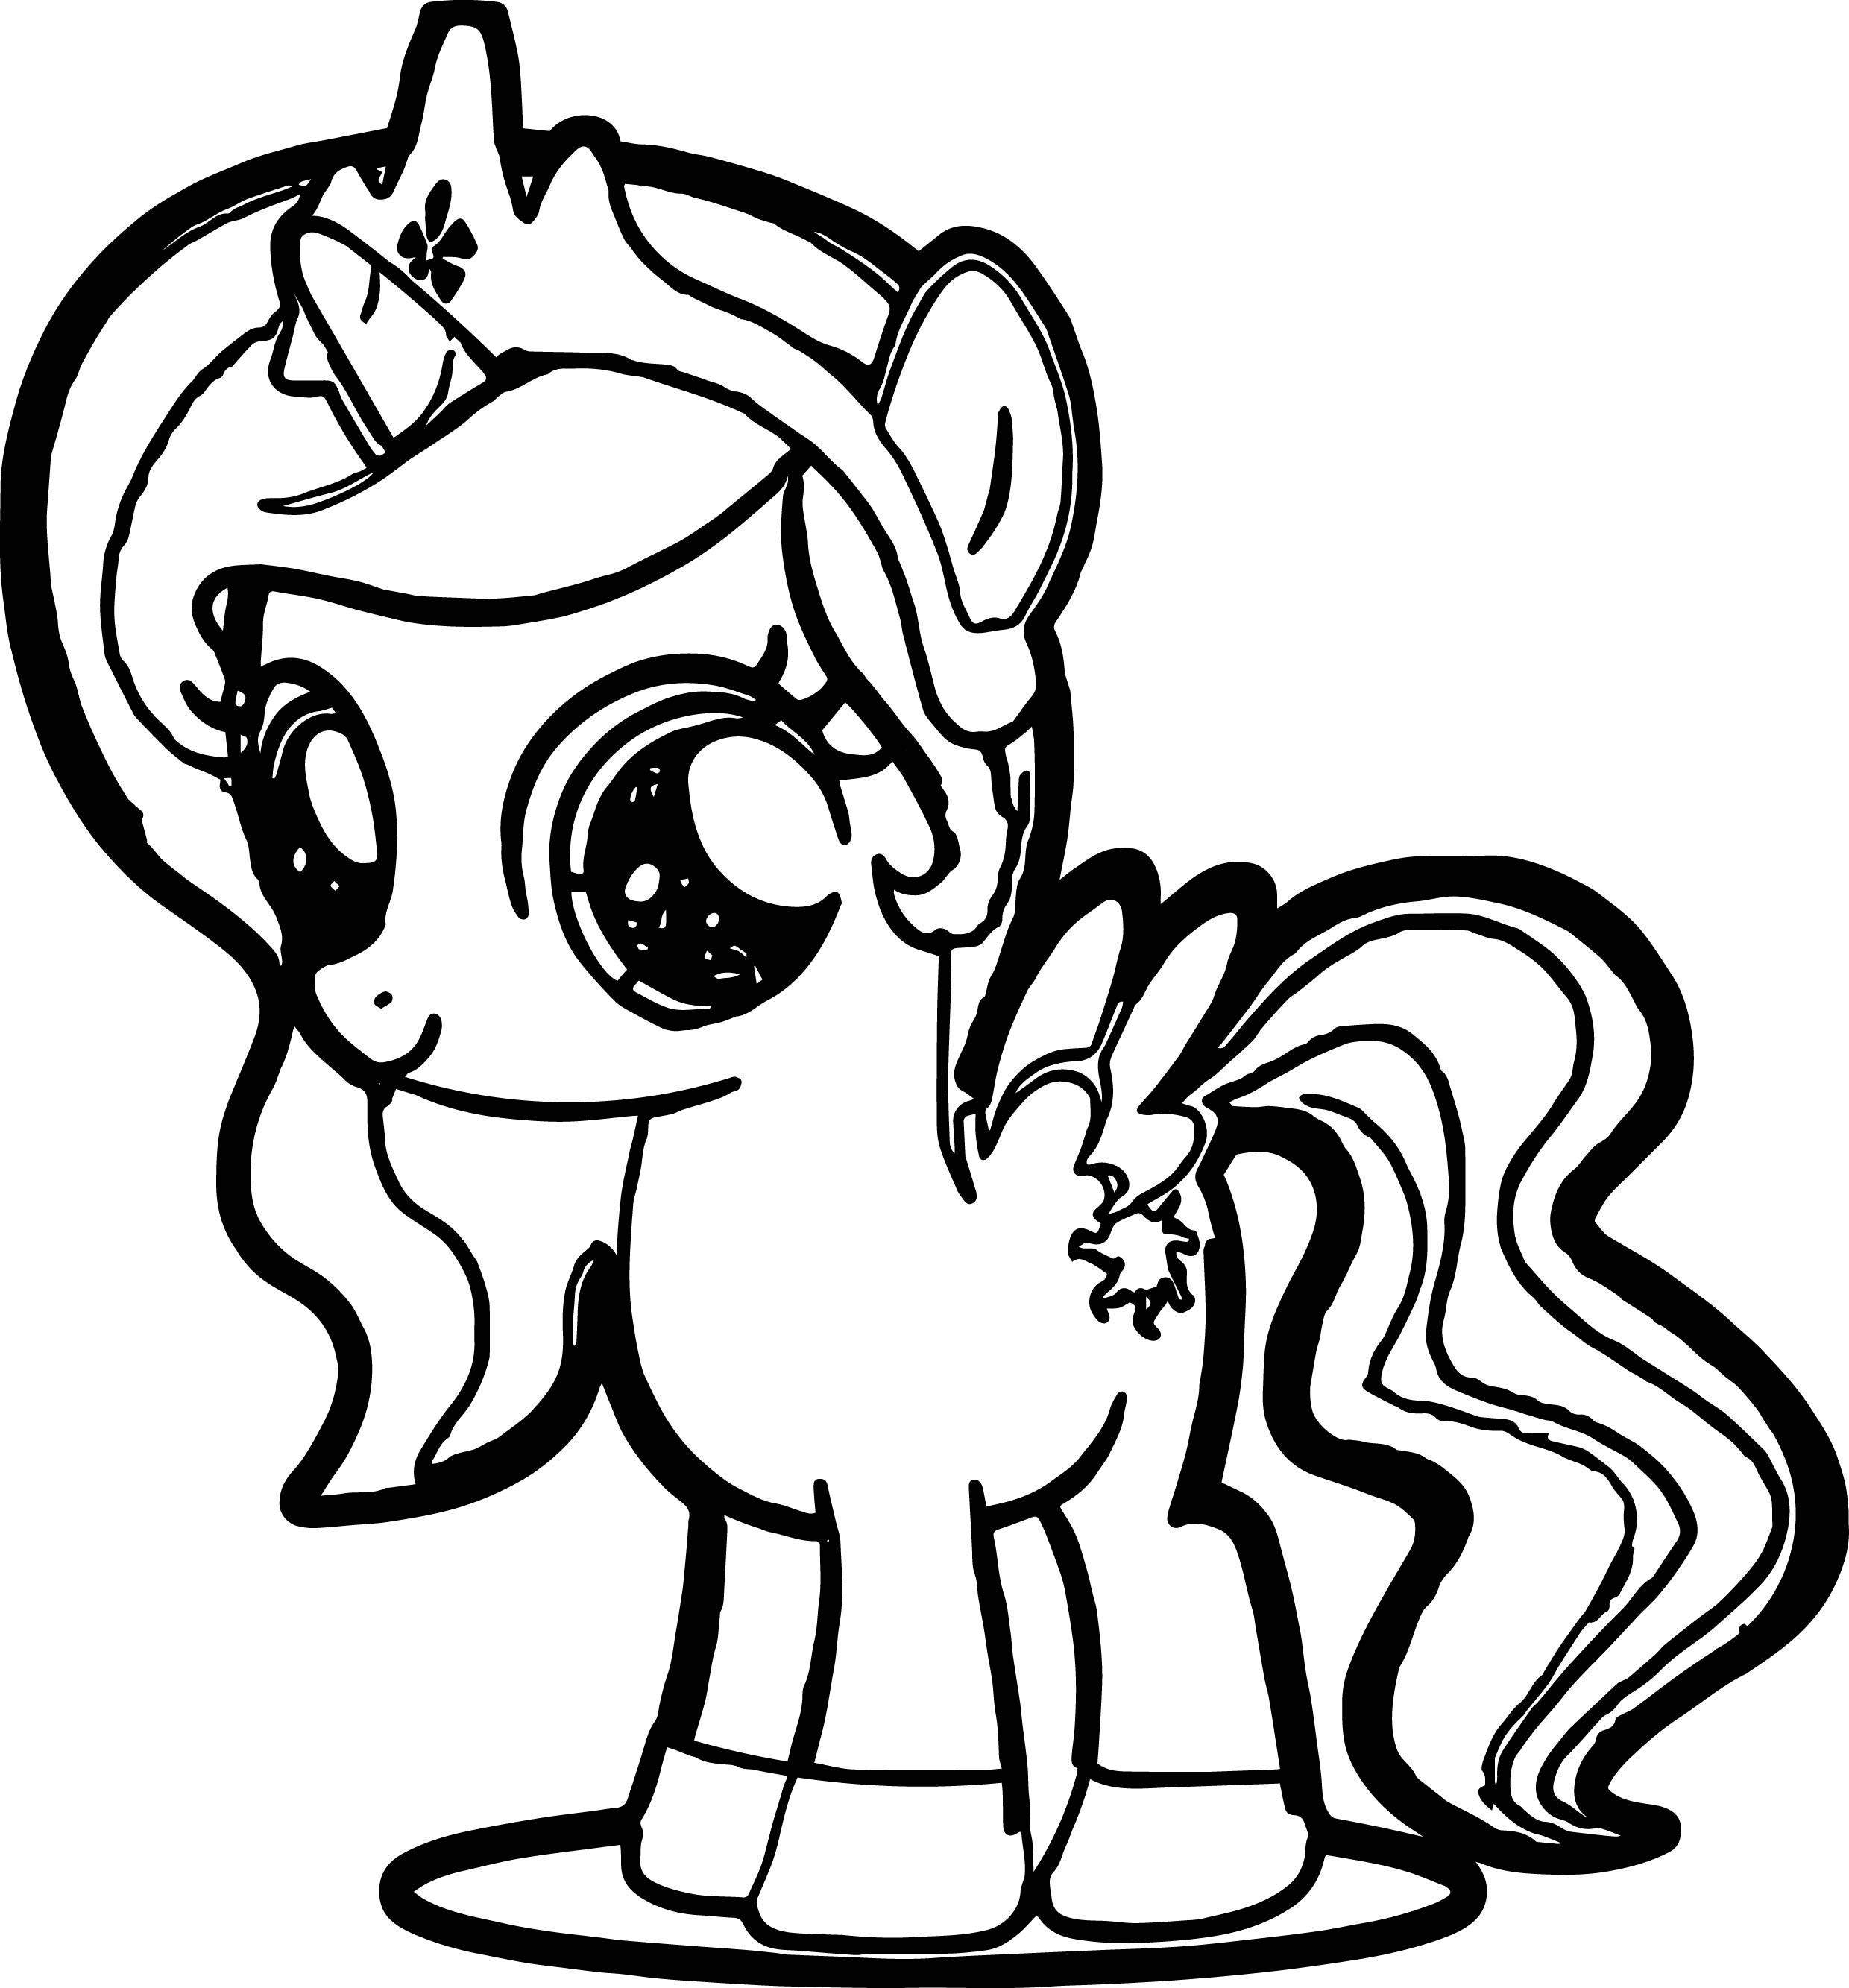 Cute Pony Coloring Pages at GetColorings.com | Free printable colorings ...